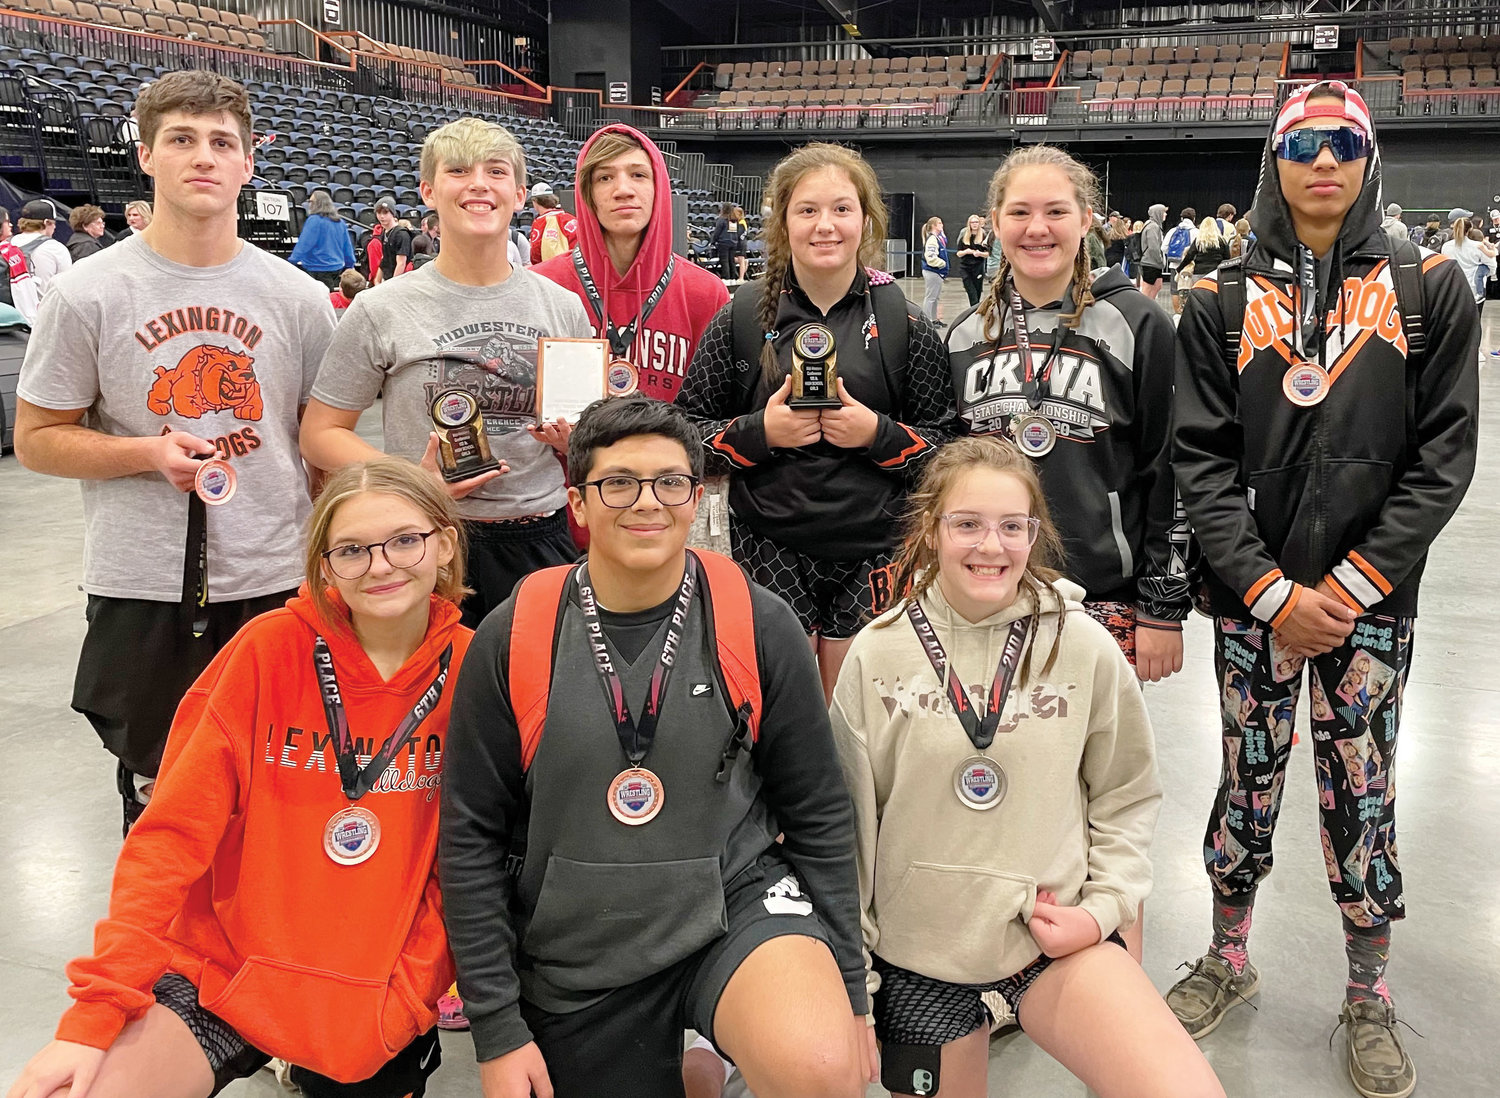 Medalists in the Midwestern Conference Wrestling Tournament last weekend are, top, from left, Brady Rillema, Izzy Pack, Tristan Buchanan, Cilee Turner, Elexa Collins and Cash Sessions. Bottom row - Hope Grove, Issac Martin and Bailie Forbes.